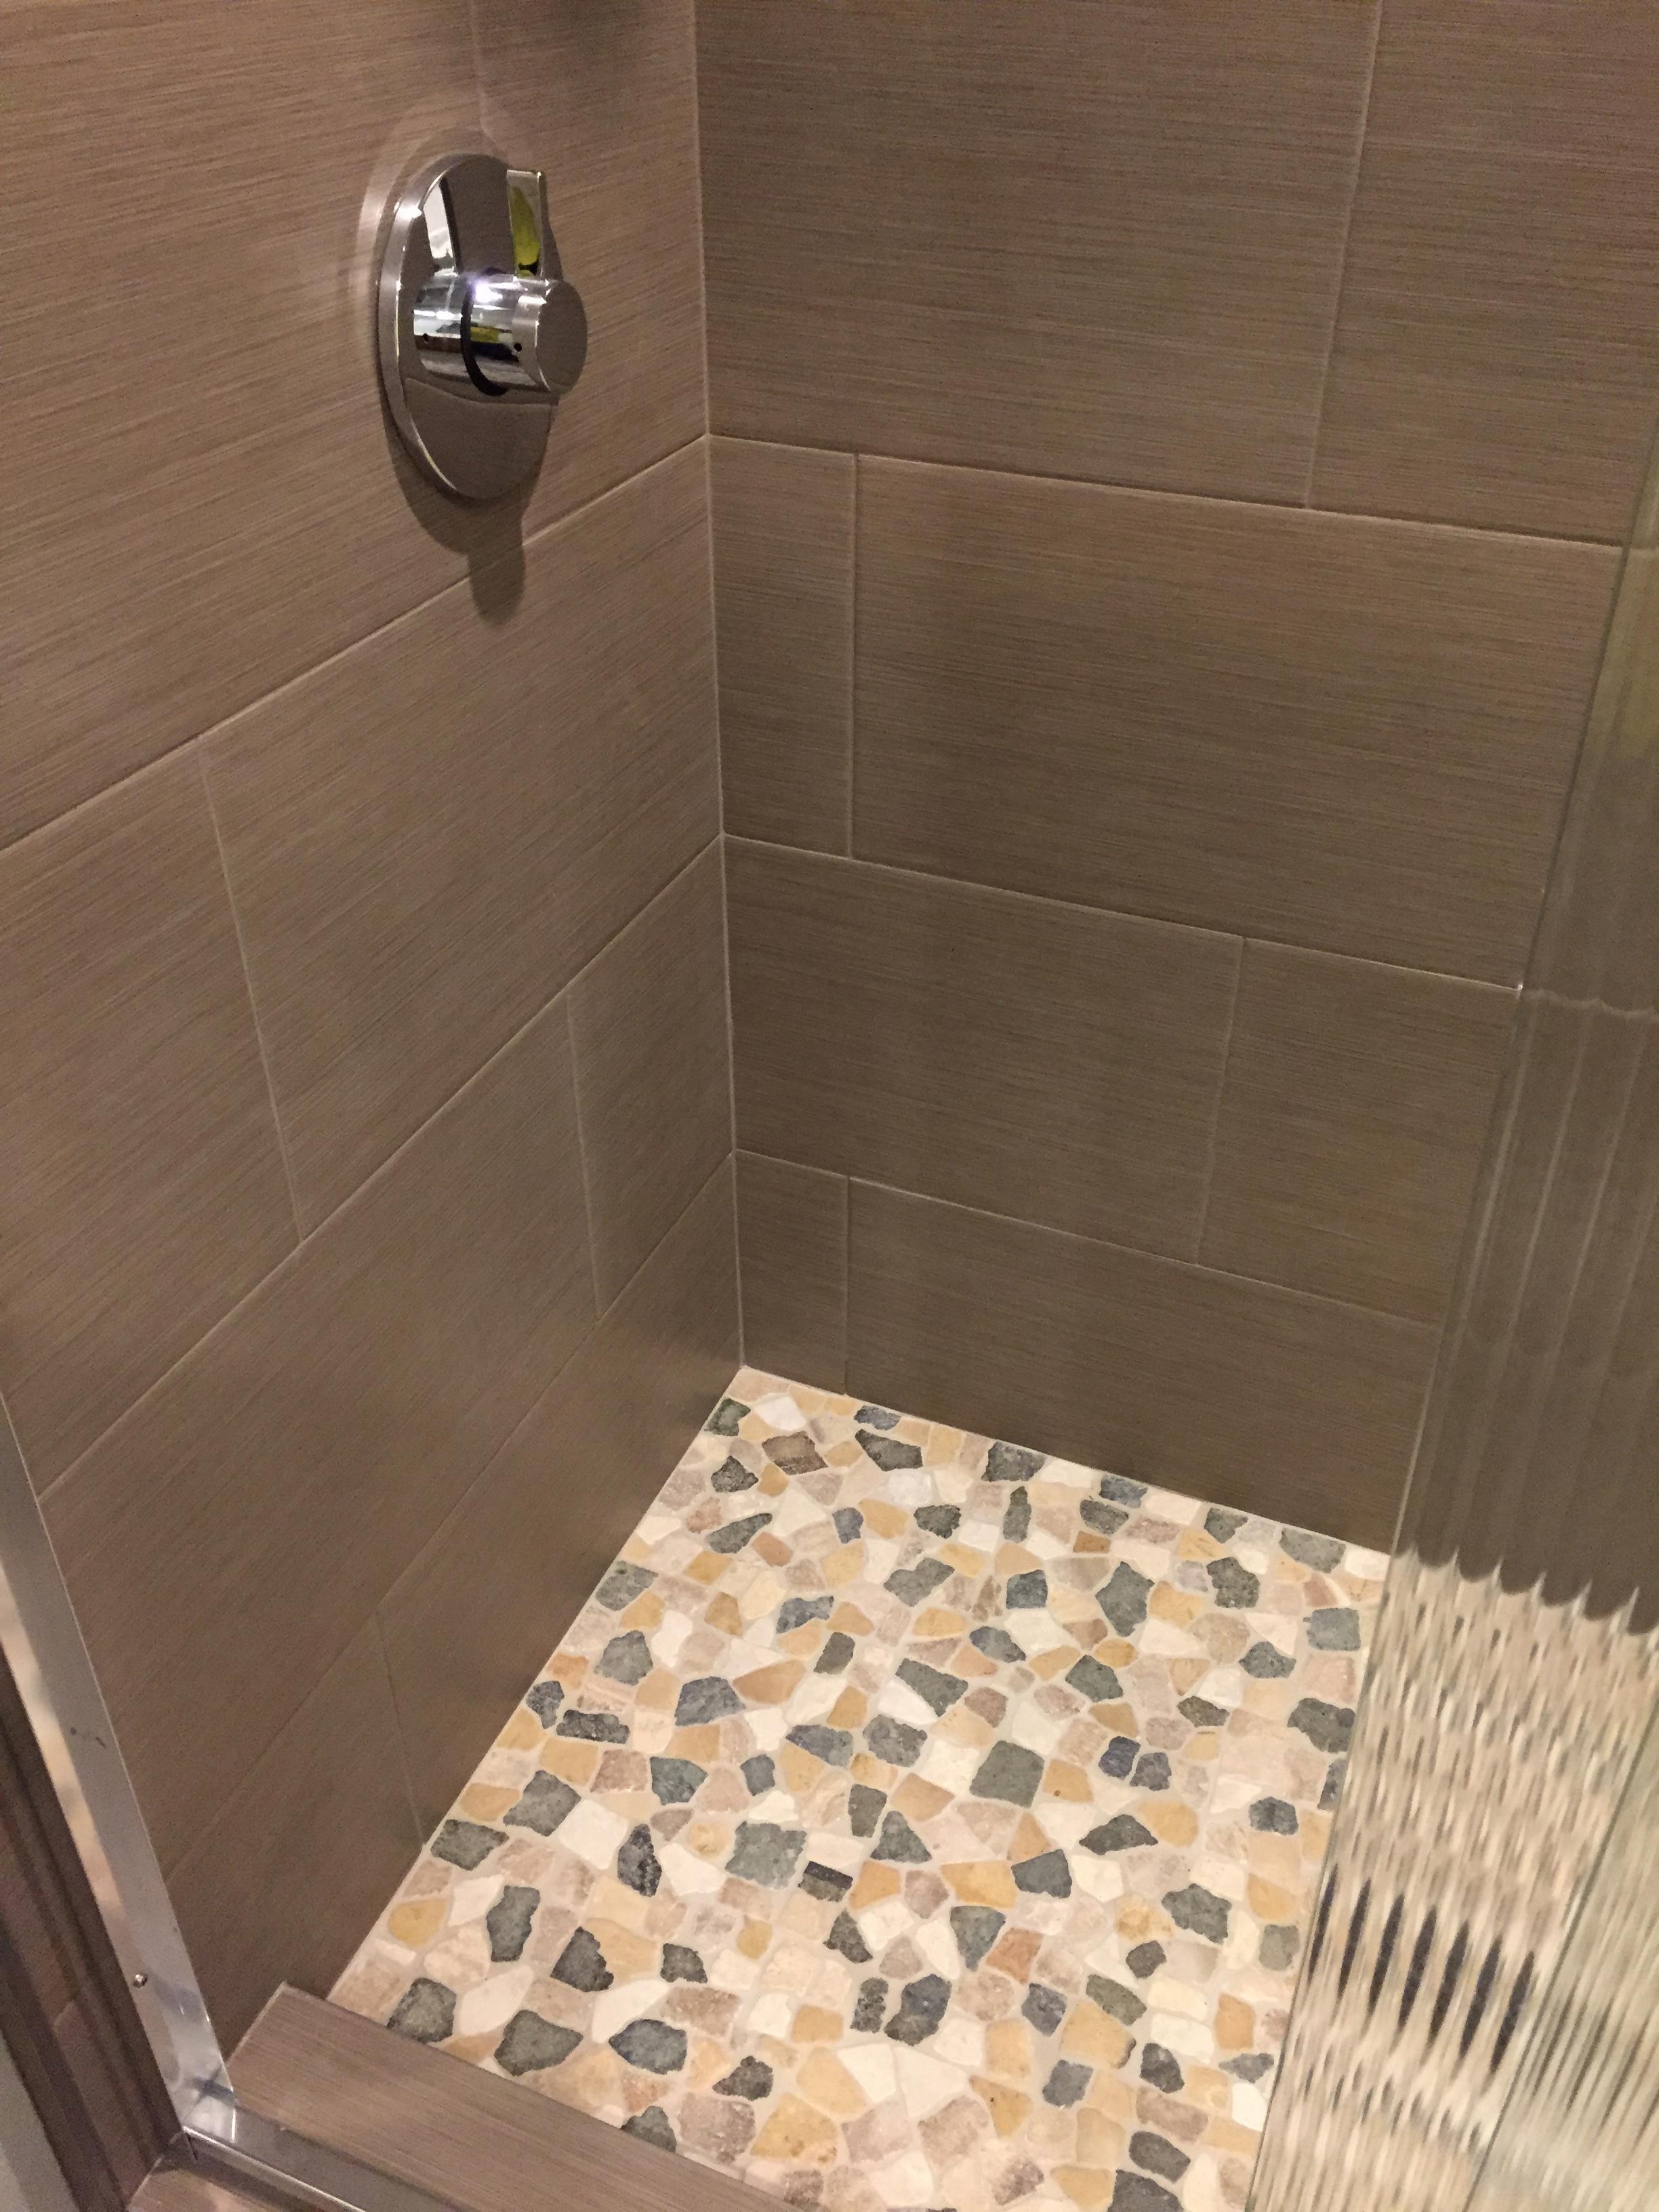 Condo Shower After 2